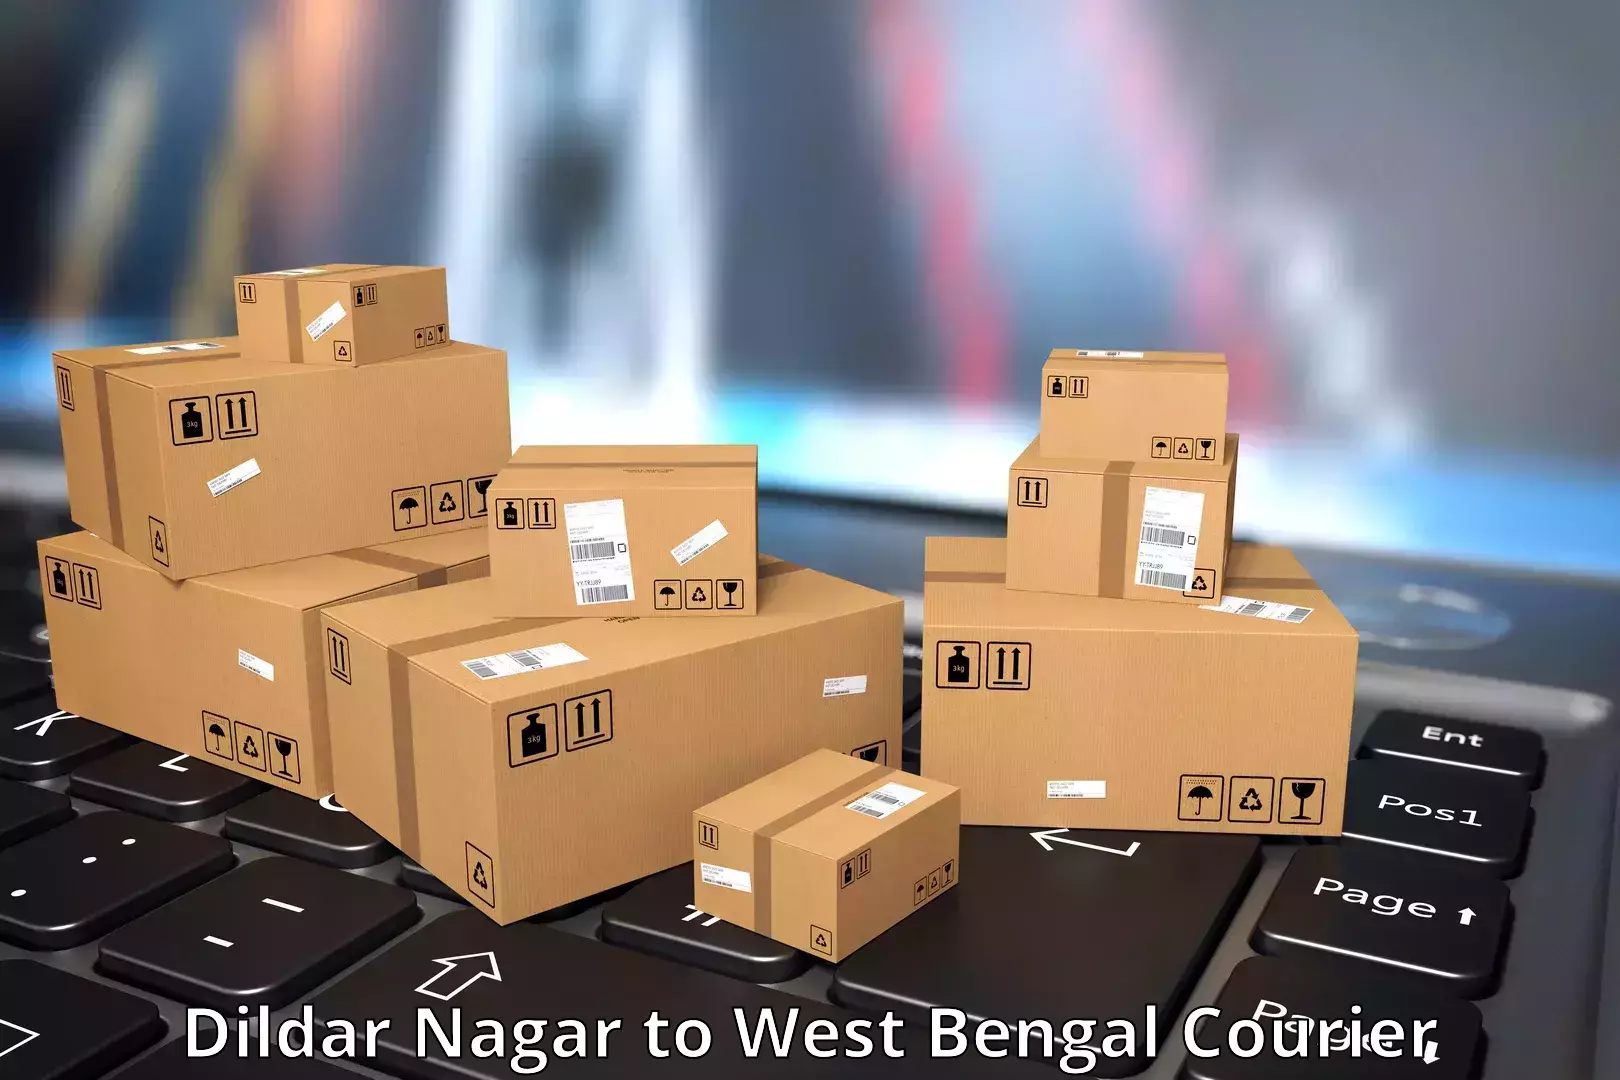 24/7 courier service in Dildar Nagar to West Bengal